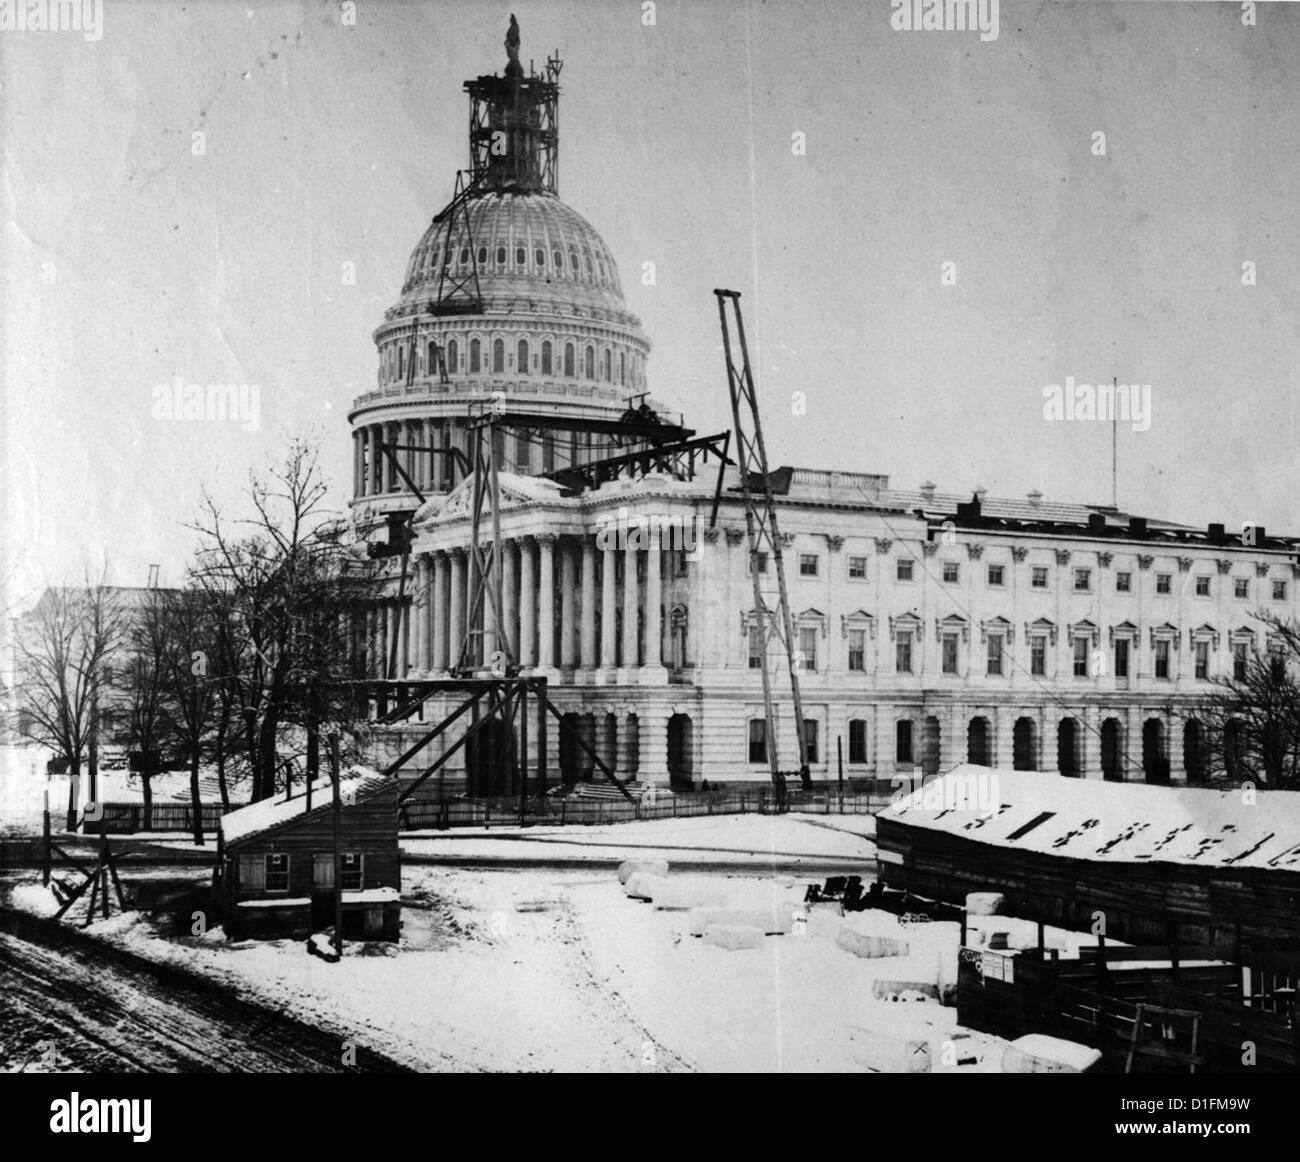 United States Capitol December 1863 - recently installed Statue of Freedom along with the Senate Chamber under construction. Stock Photo